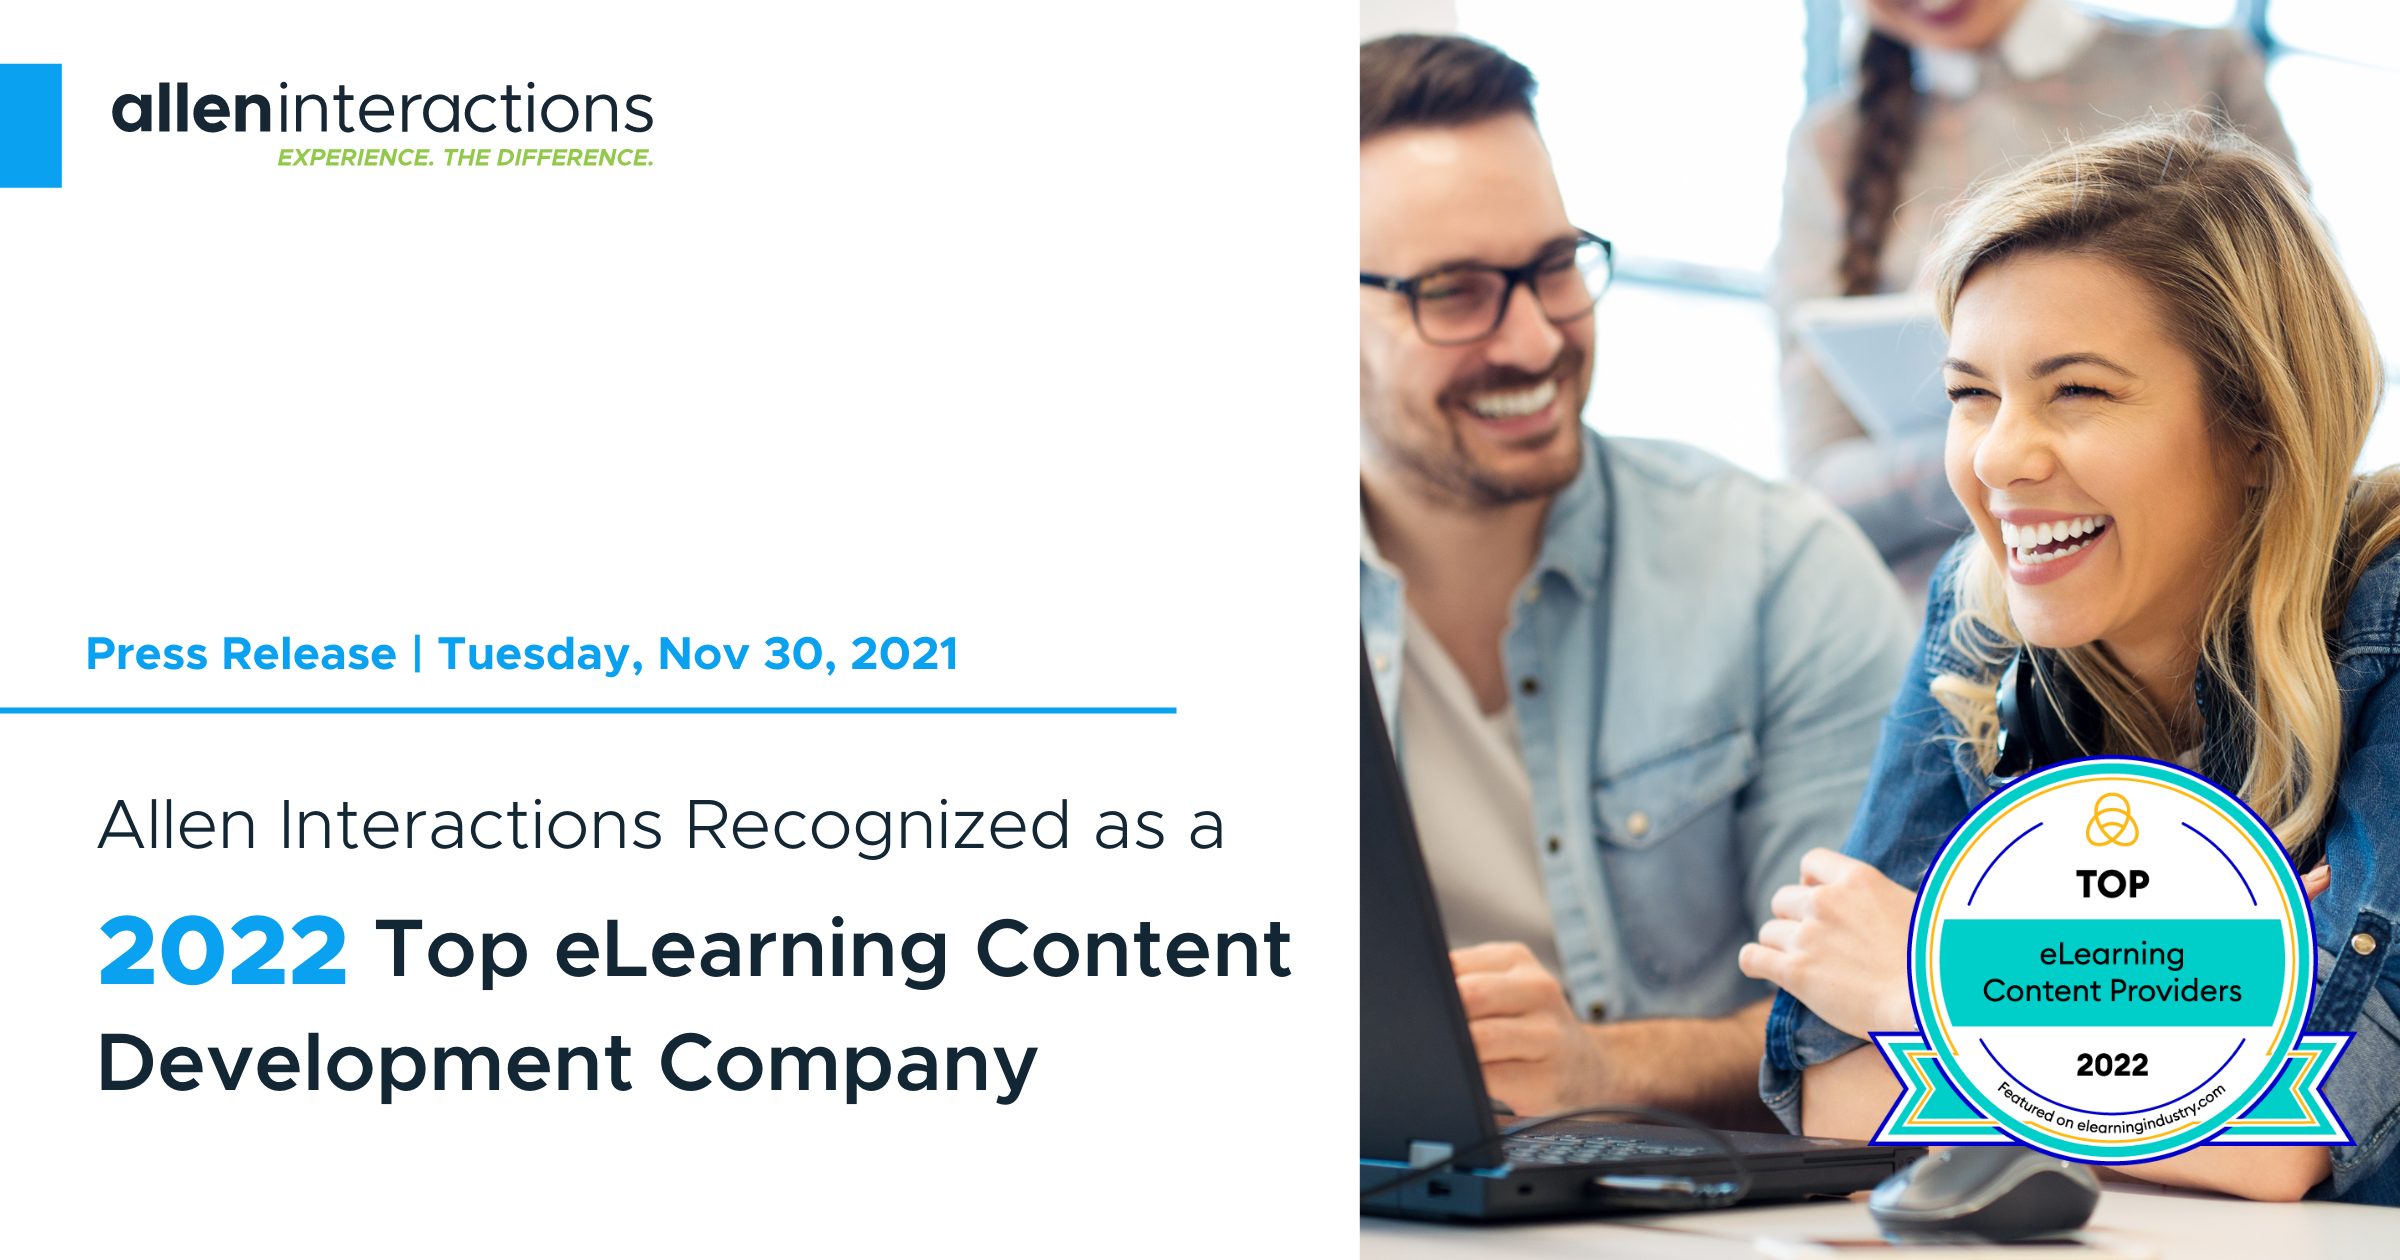 Allen Interactions Recognized by eLearning Industry as a 2022 Top eLearning Content Development Company